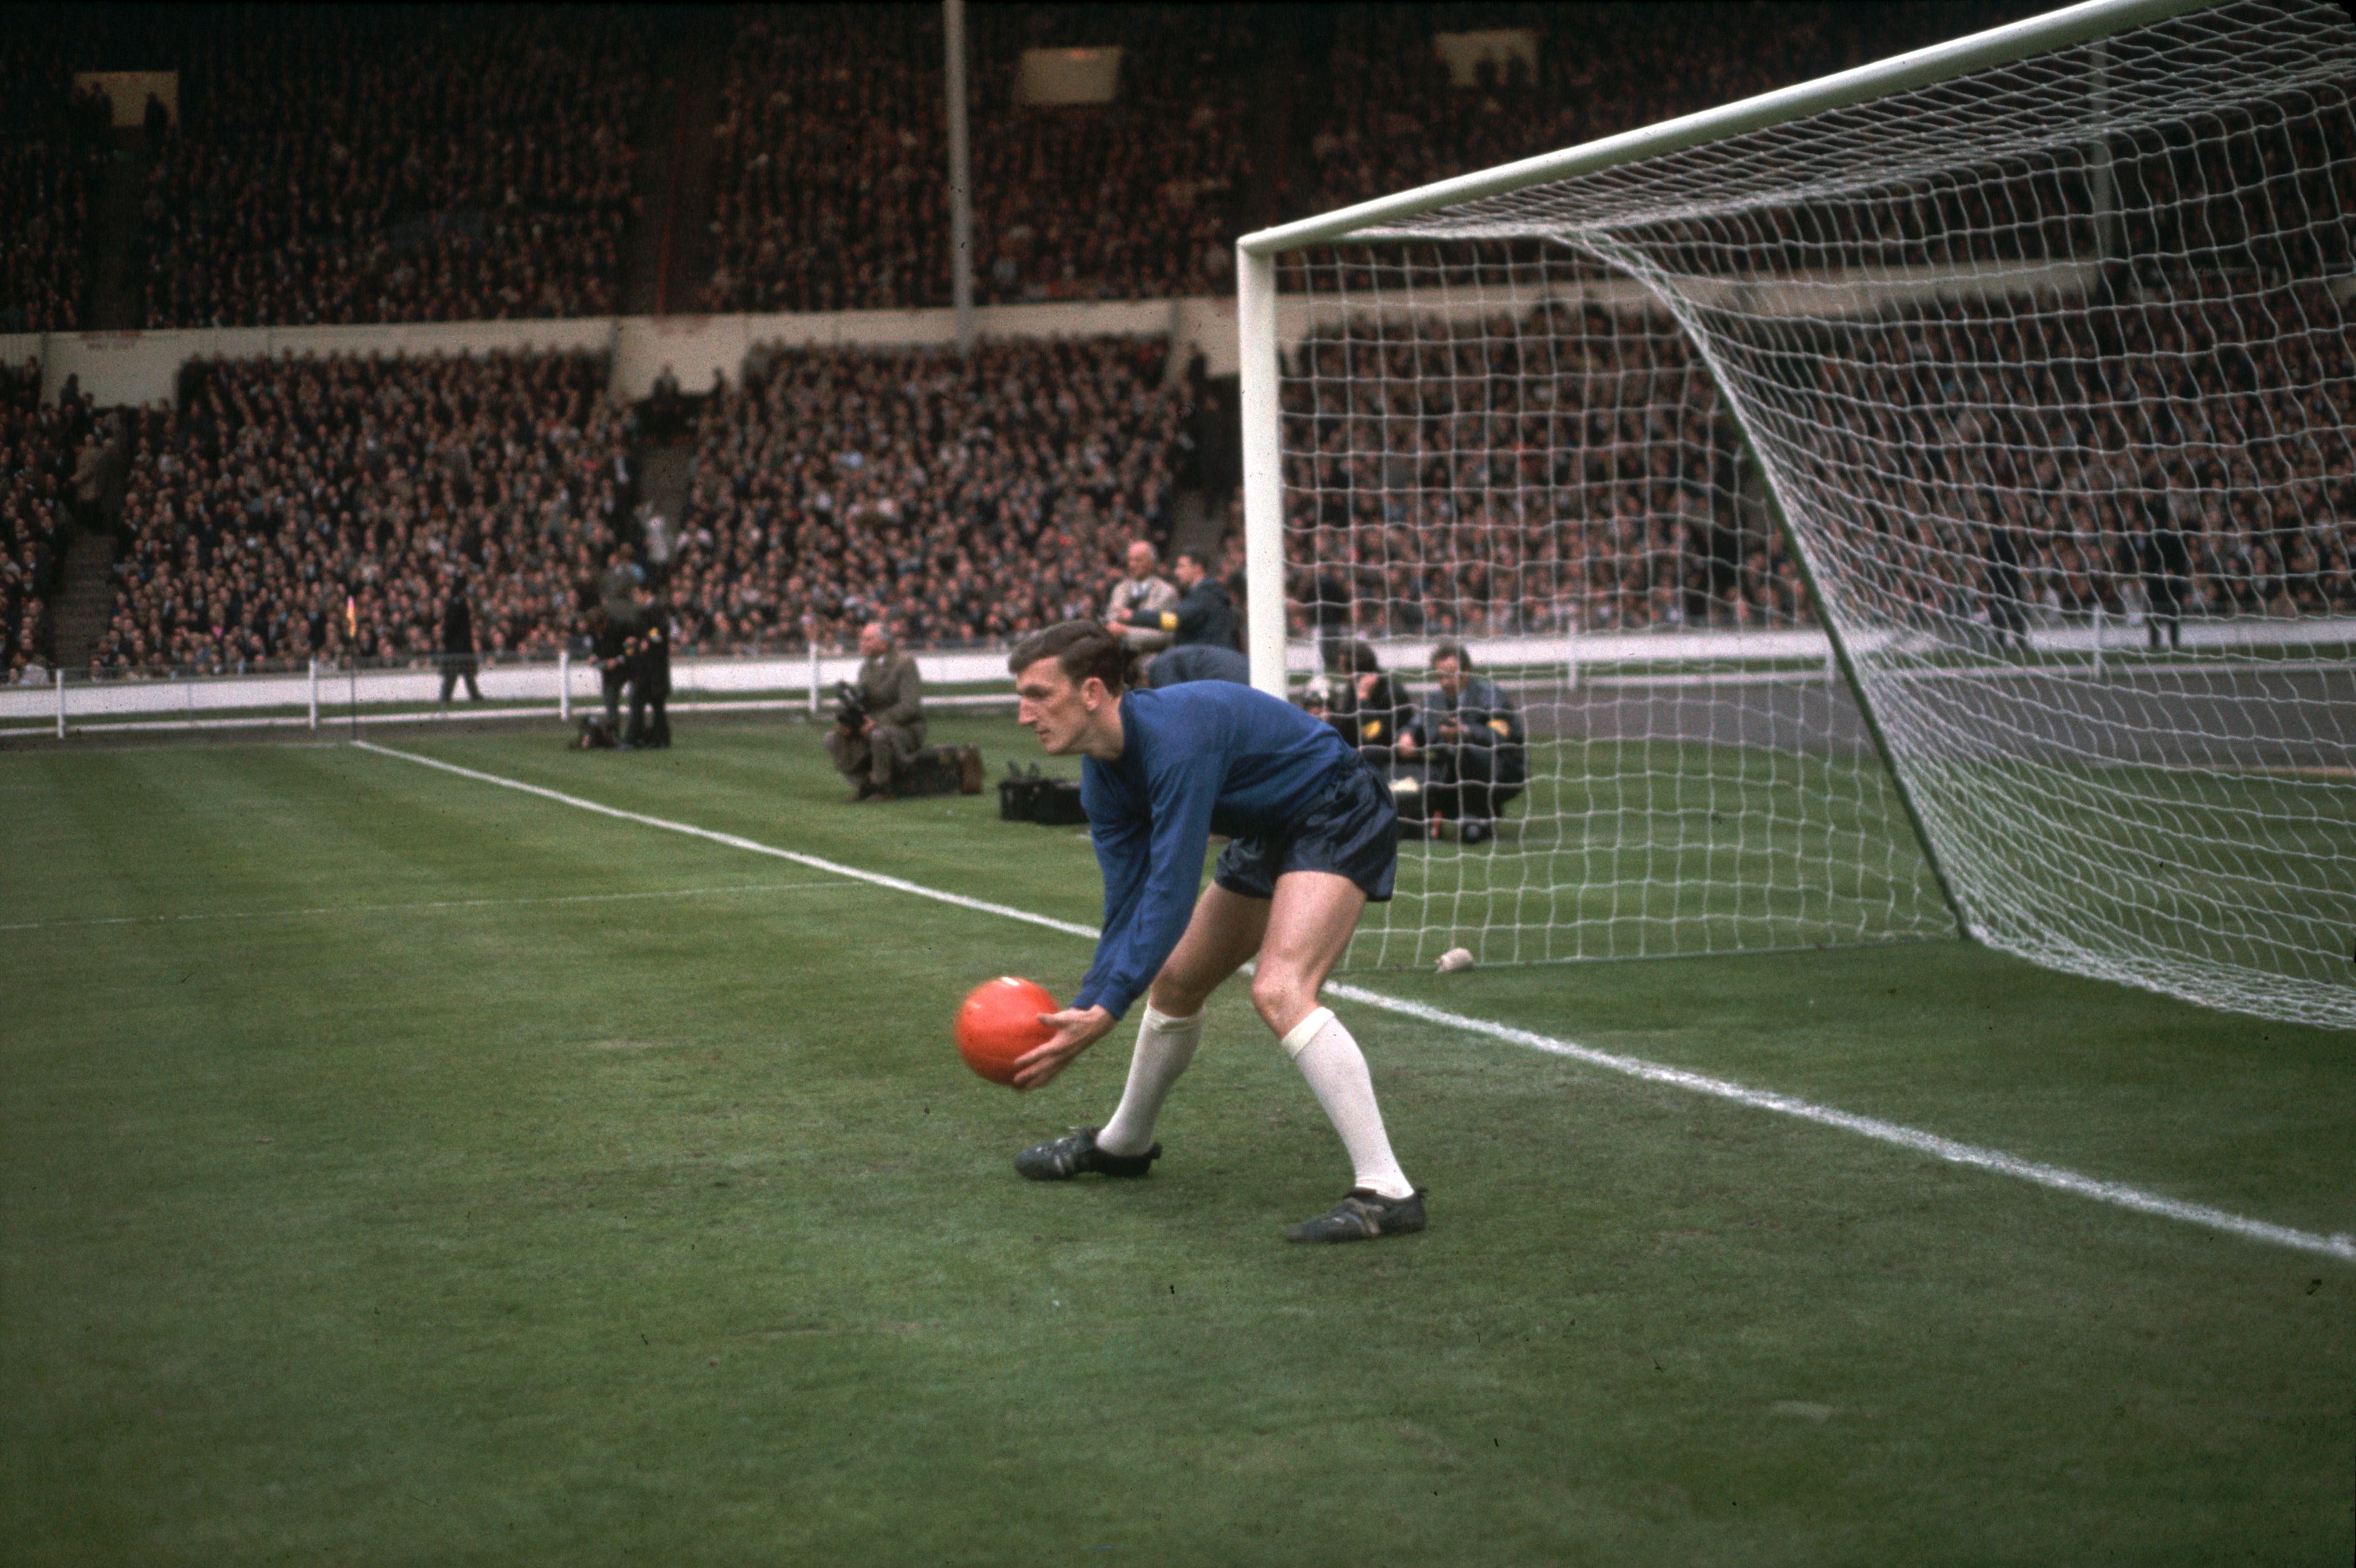 Manchester United goalkeeper Alex Stepney on his sole appearance for England, against Sweden at Wembley in 1968.